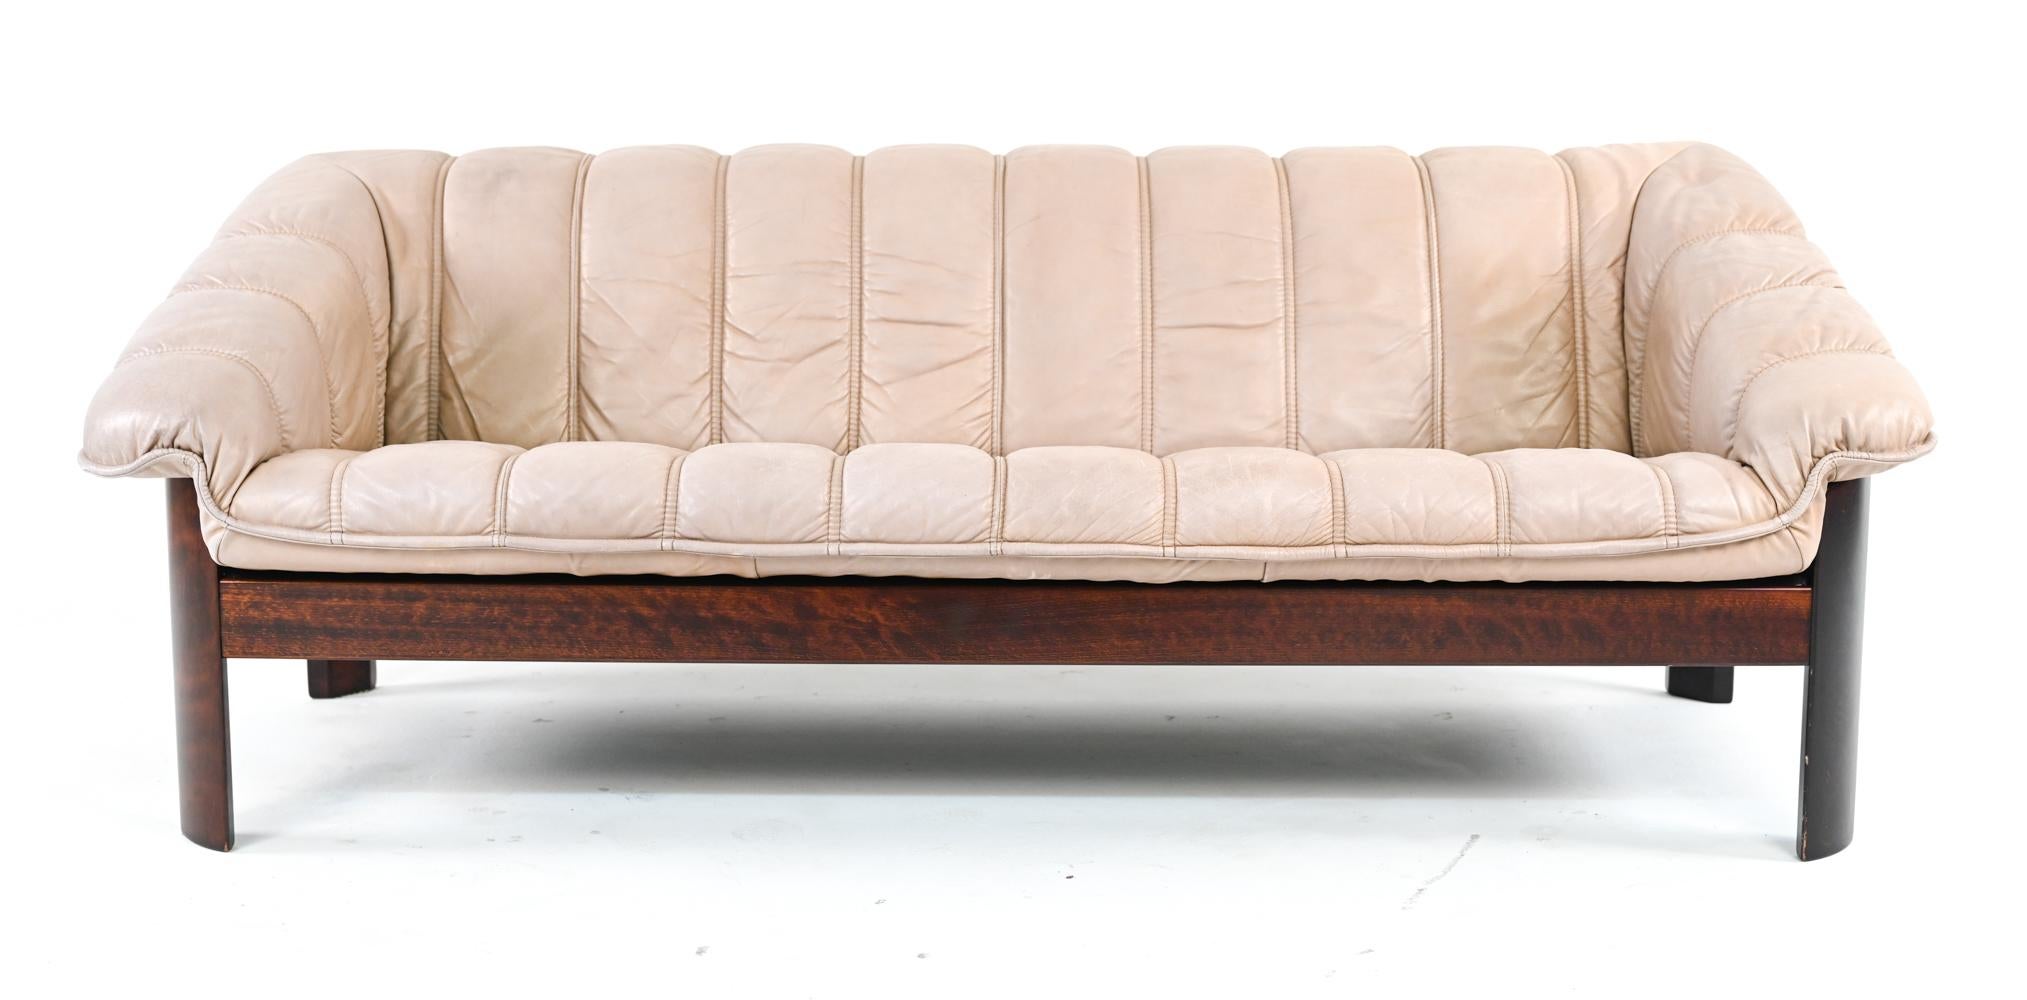 Ekorness Norway Mid-Century Sofa & Loveseat in Taupe Leather For Sale 2